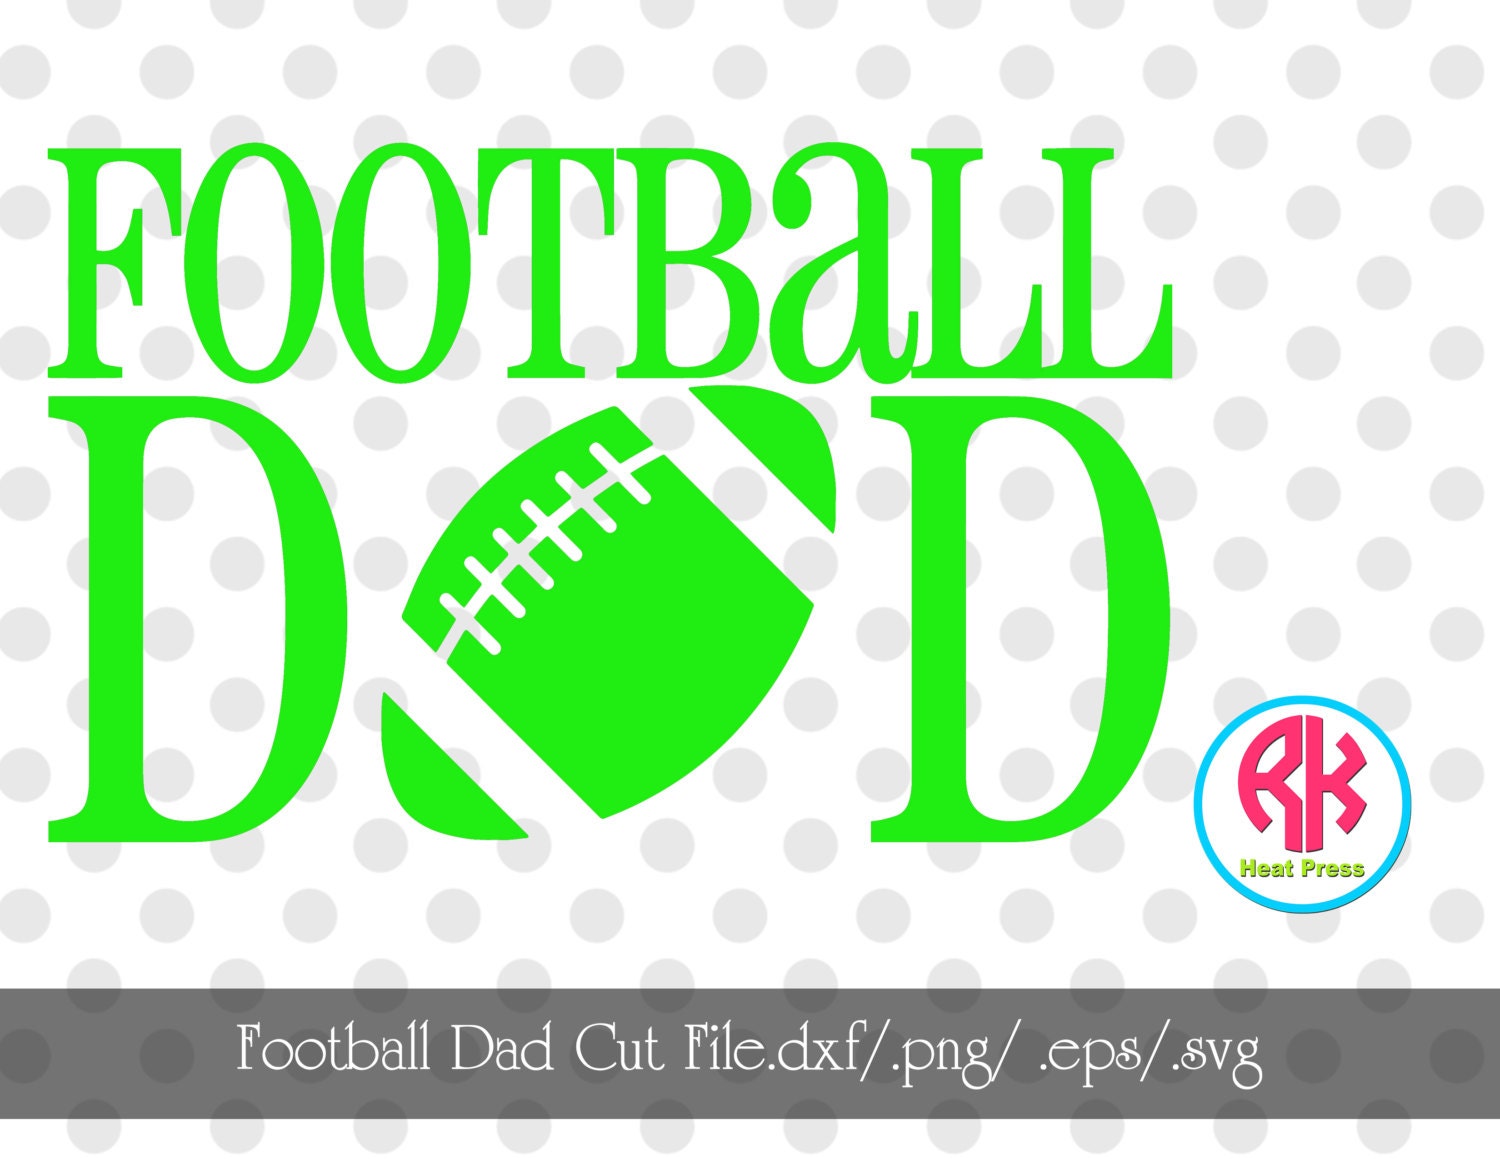 Download Football DAD Cut Files .png/.eps/.svg/.dxf